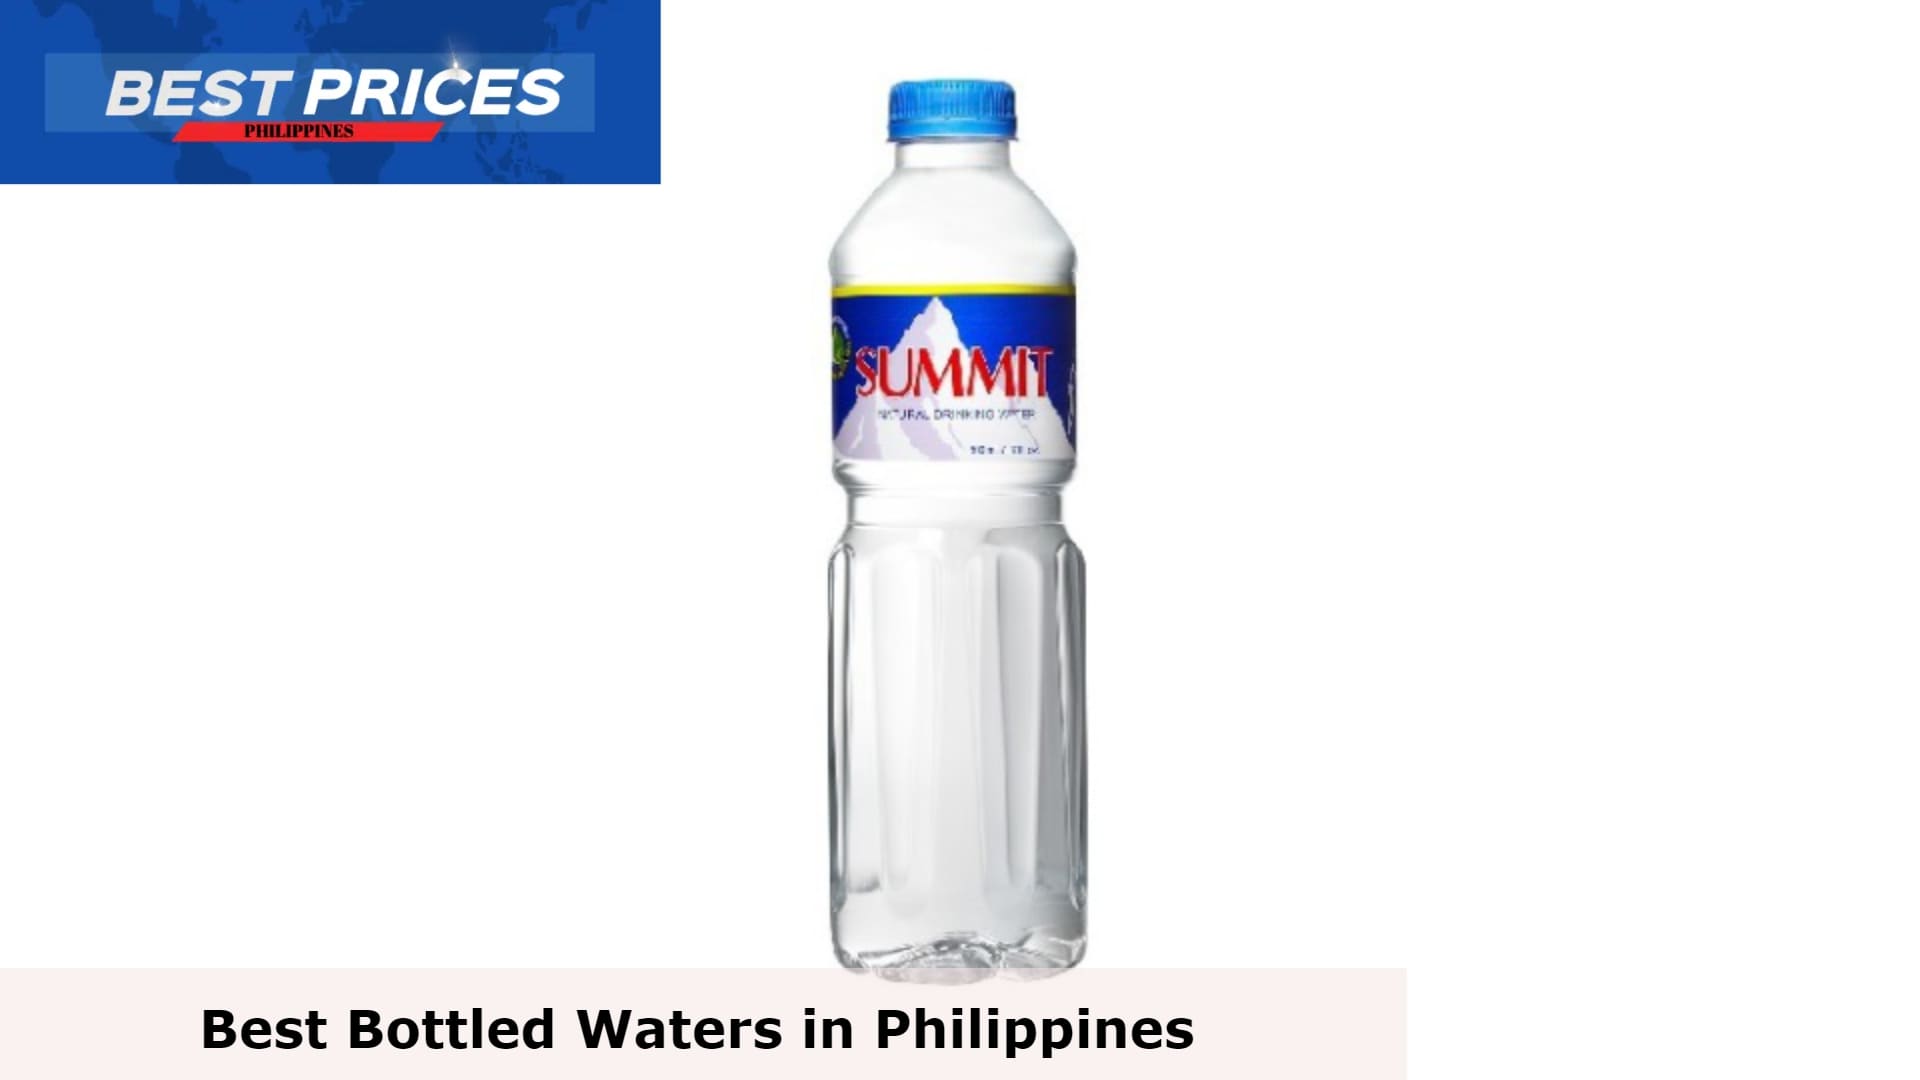 Summit Natural Drinking Water - Bottled Water Philippines, What is the best bottled water in the Philippines?, list of mineral water brands in the philippines, bottled water philippines price, best bottled water philippines, cheapest bottled water philippines, 1 box of bottled water price philippines, wet bottled water price philippines, 1 liter bottled water price philippines, 
nature spring bottled water price, How much is a bottle of water in Philippines?, What is the best distilled water in the Philippines?, What is the top 5 bottled water in the Philippines?, Best pH level for drinking water,